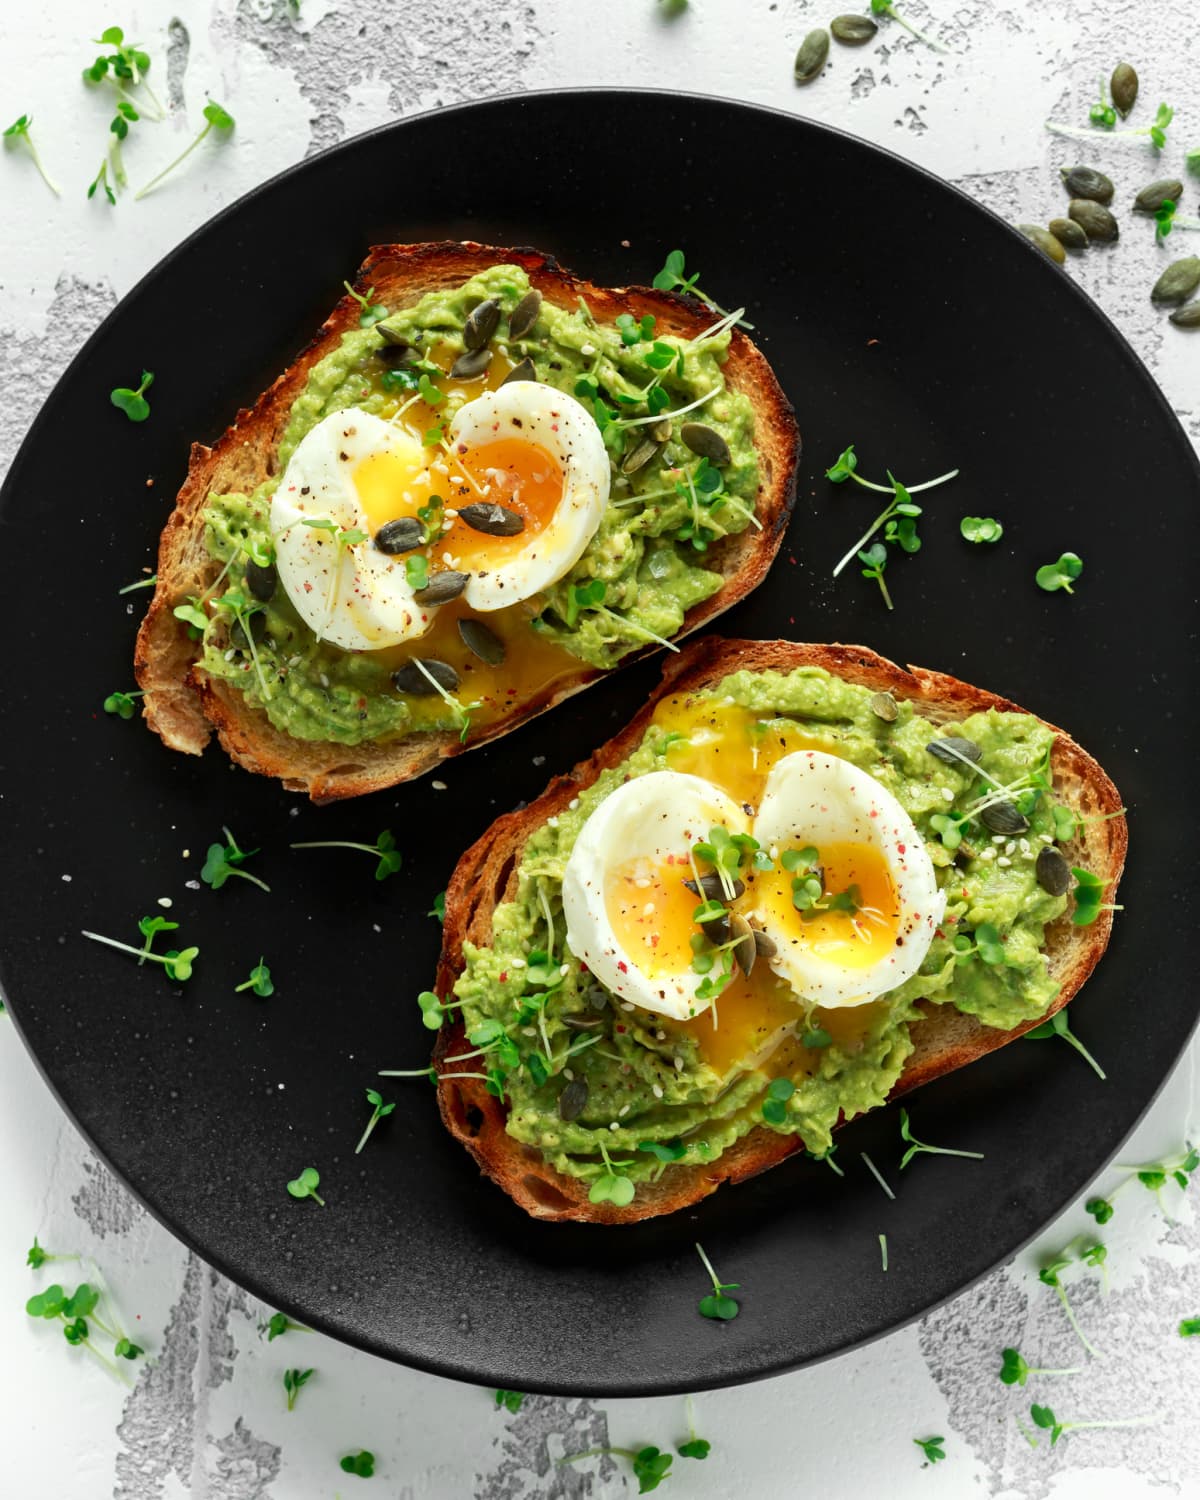 Two slices of toast with avocado and soft boiled eggs